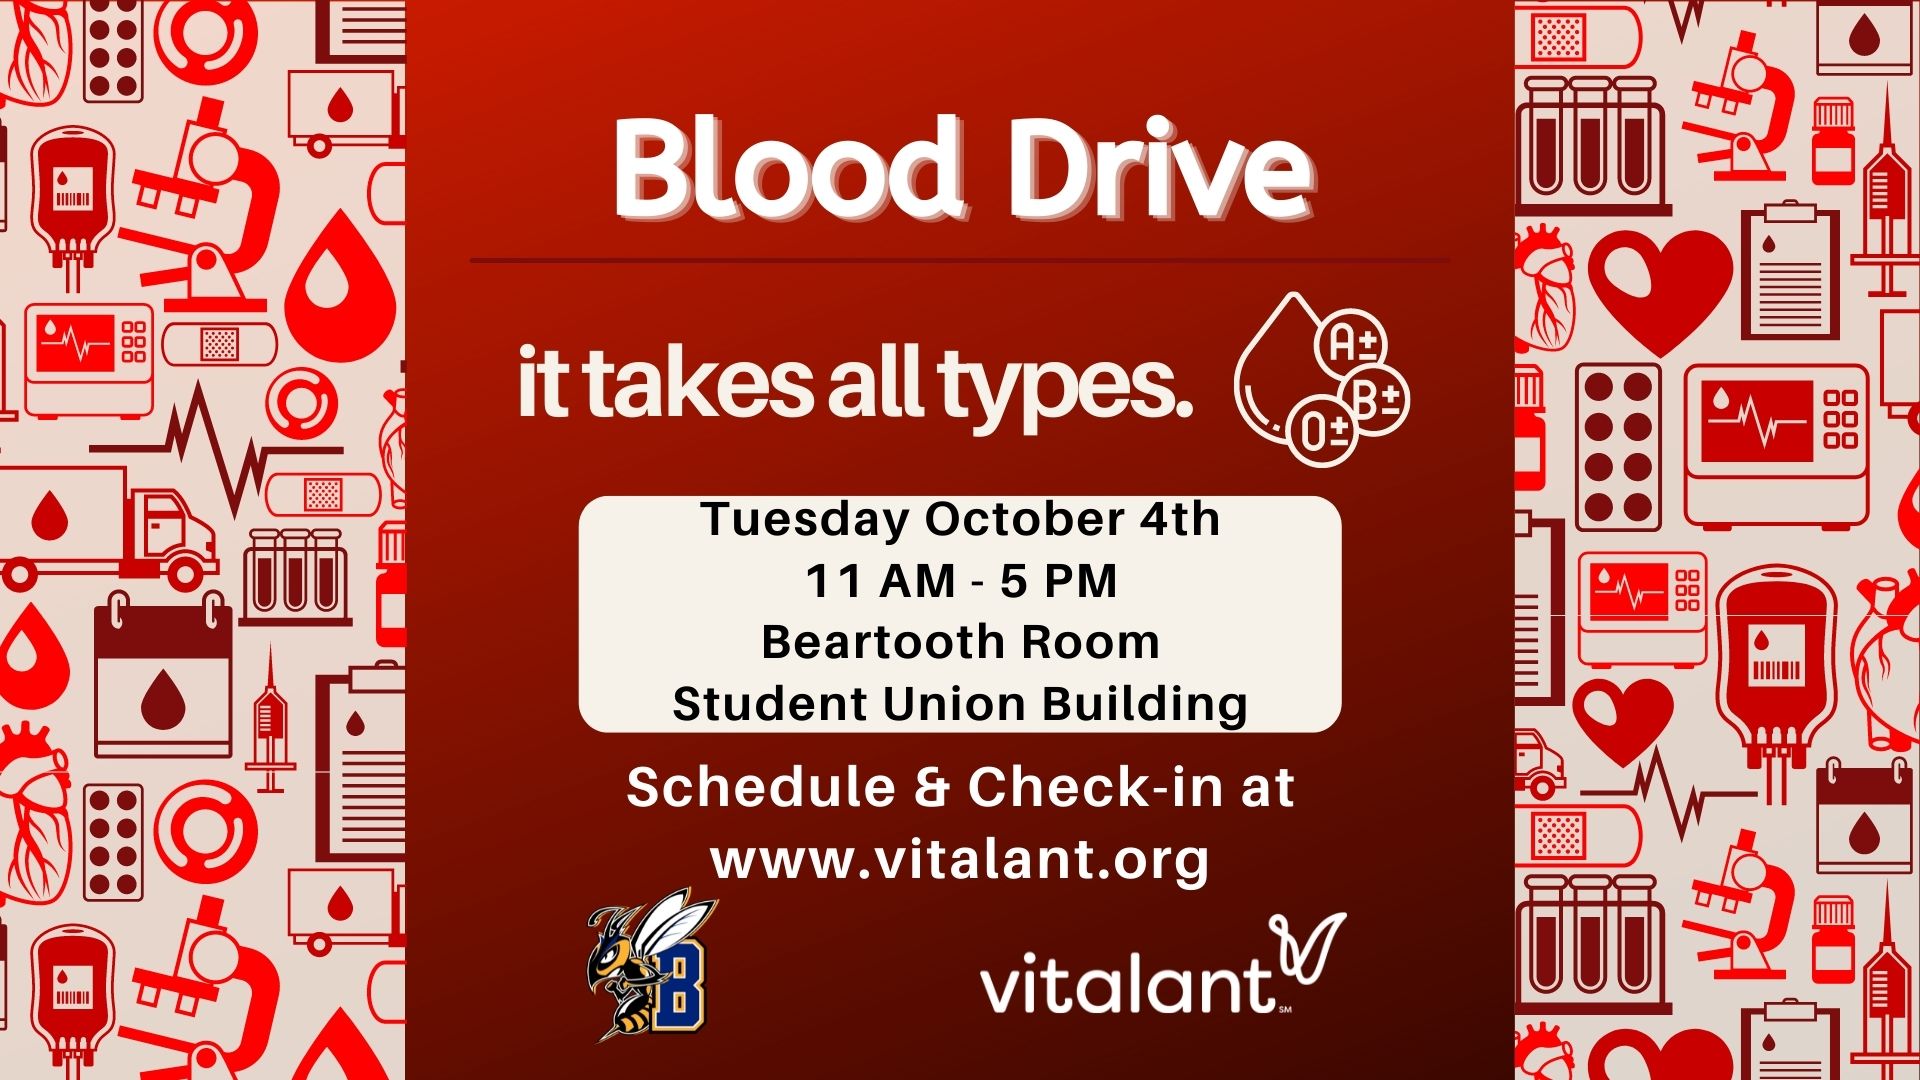 Blood Drive October 5, 2021 Banquest A and B. from 12 PM to 4 PM.